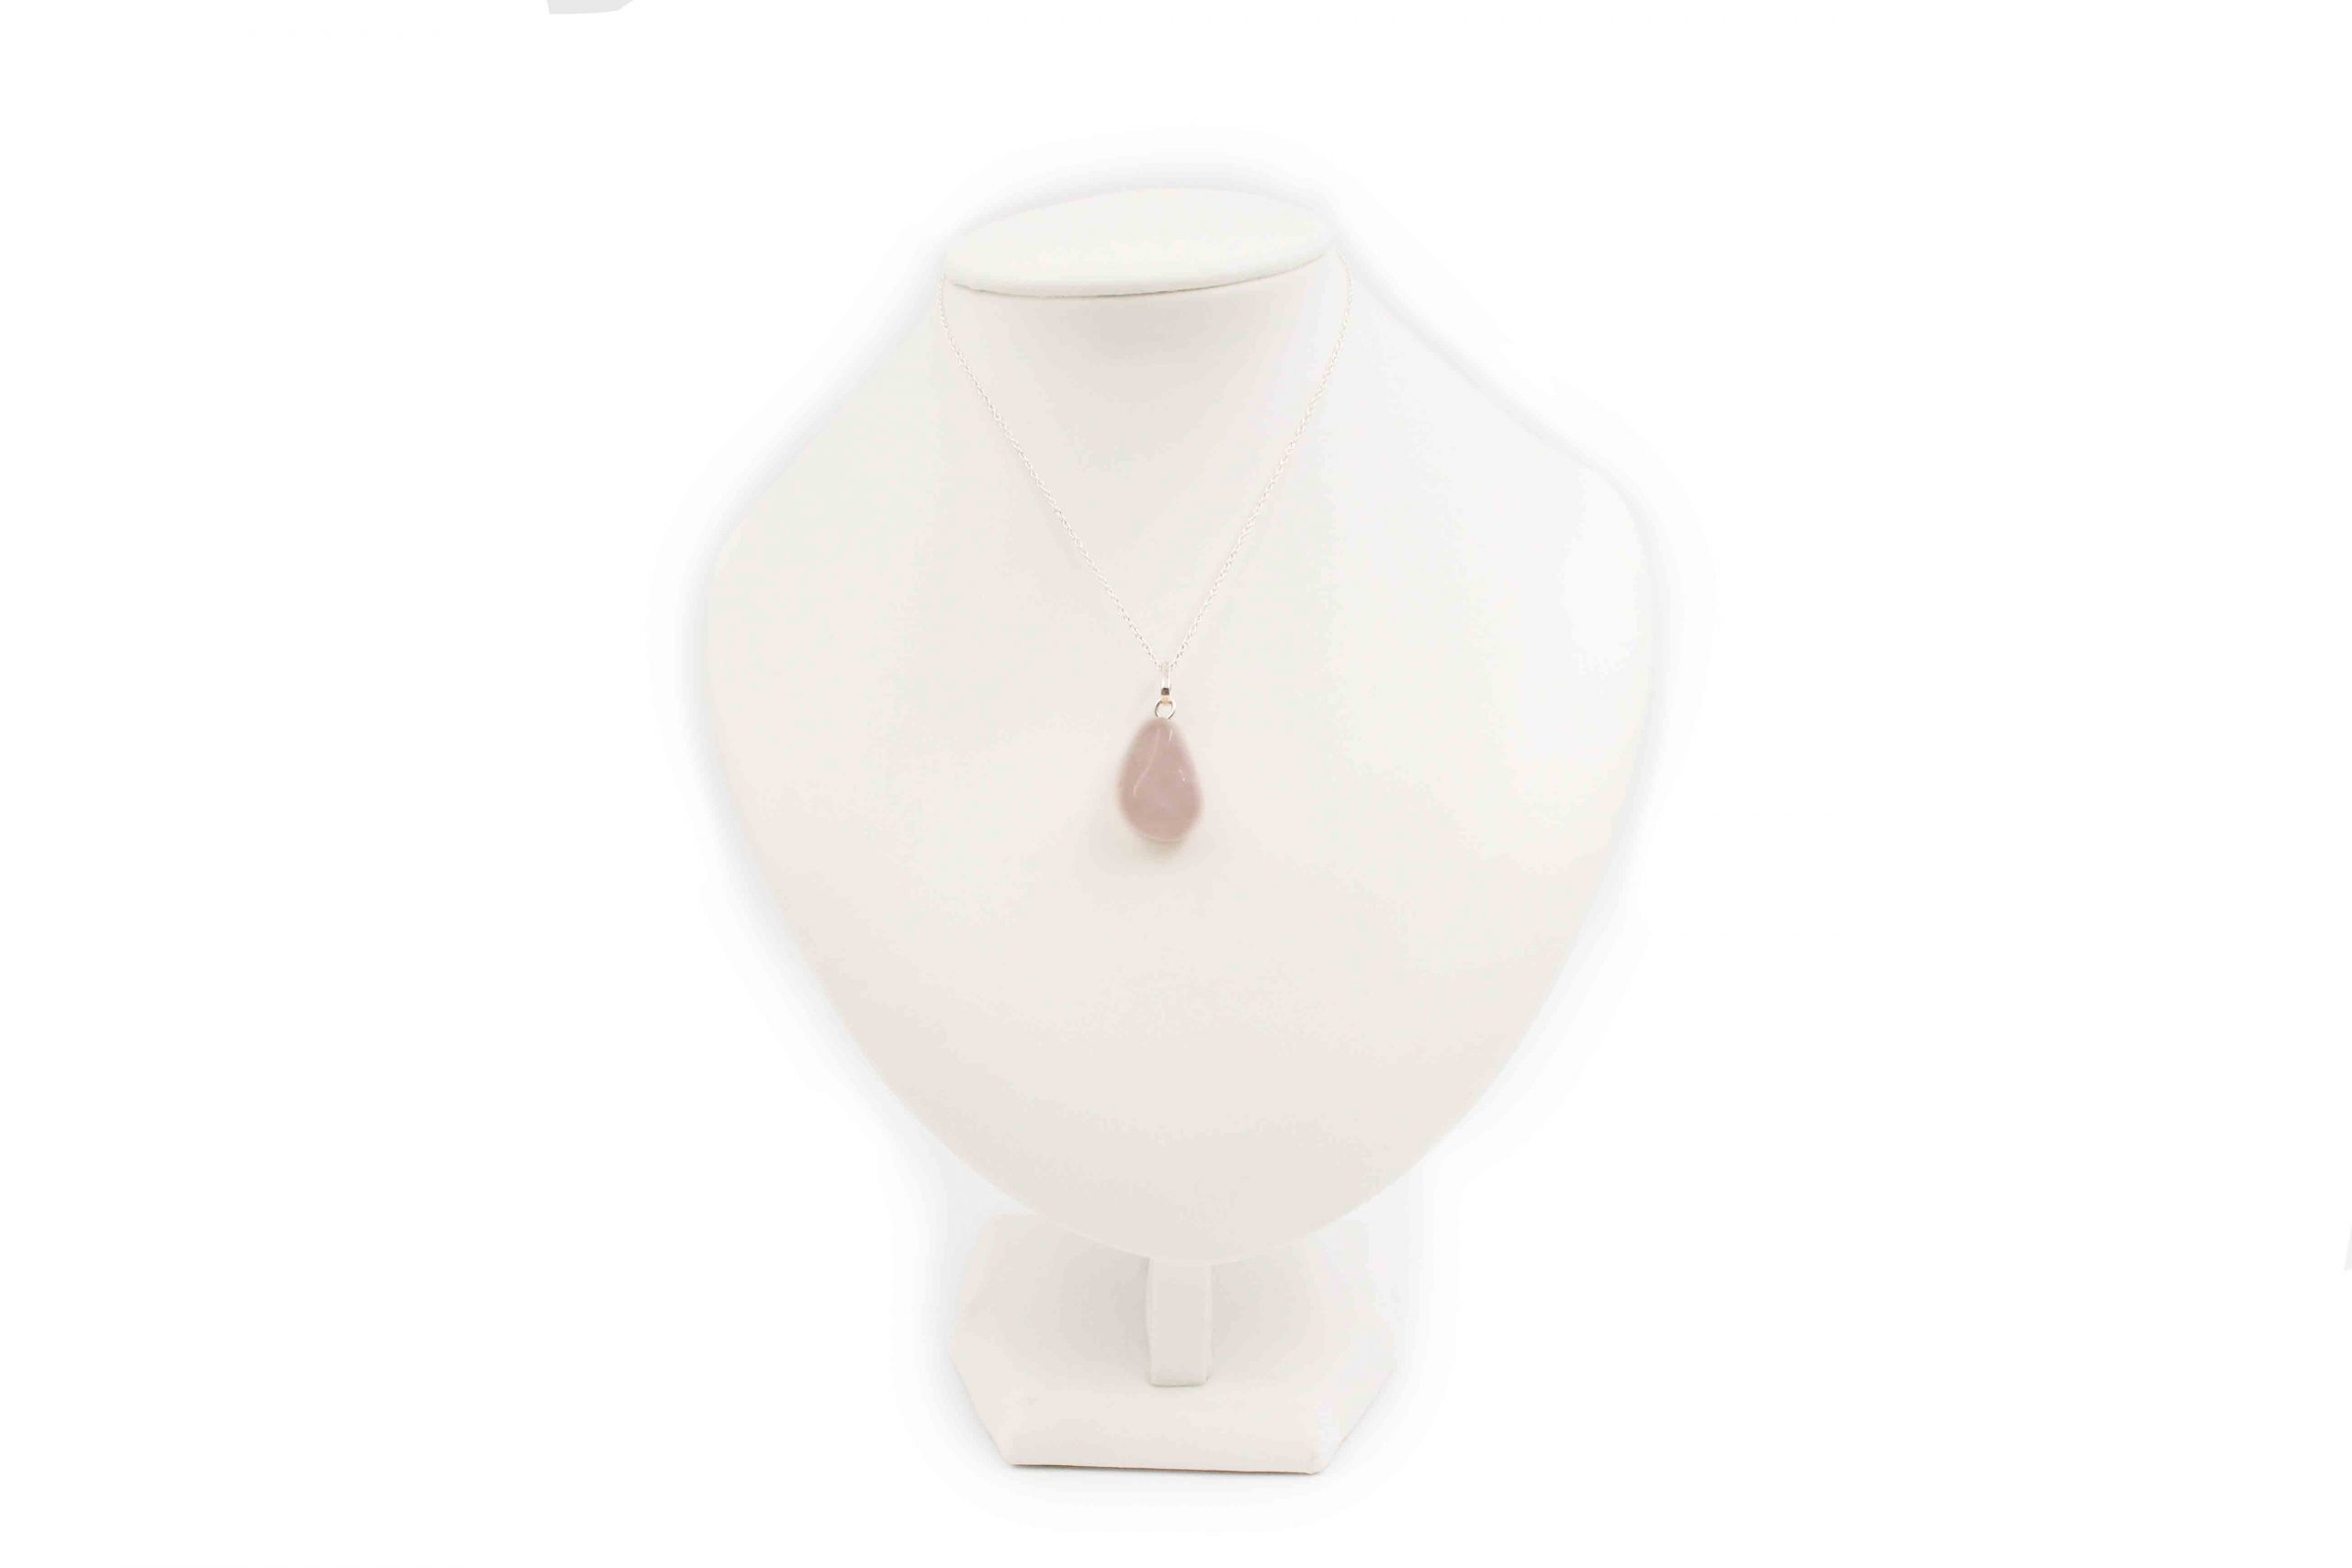 Rose Quartz Tumbled Pendant in Sterling Silver - Crystal Dreams